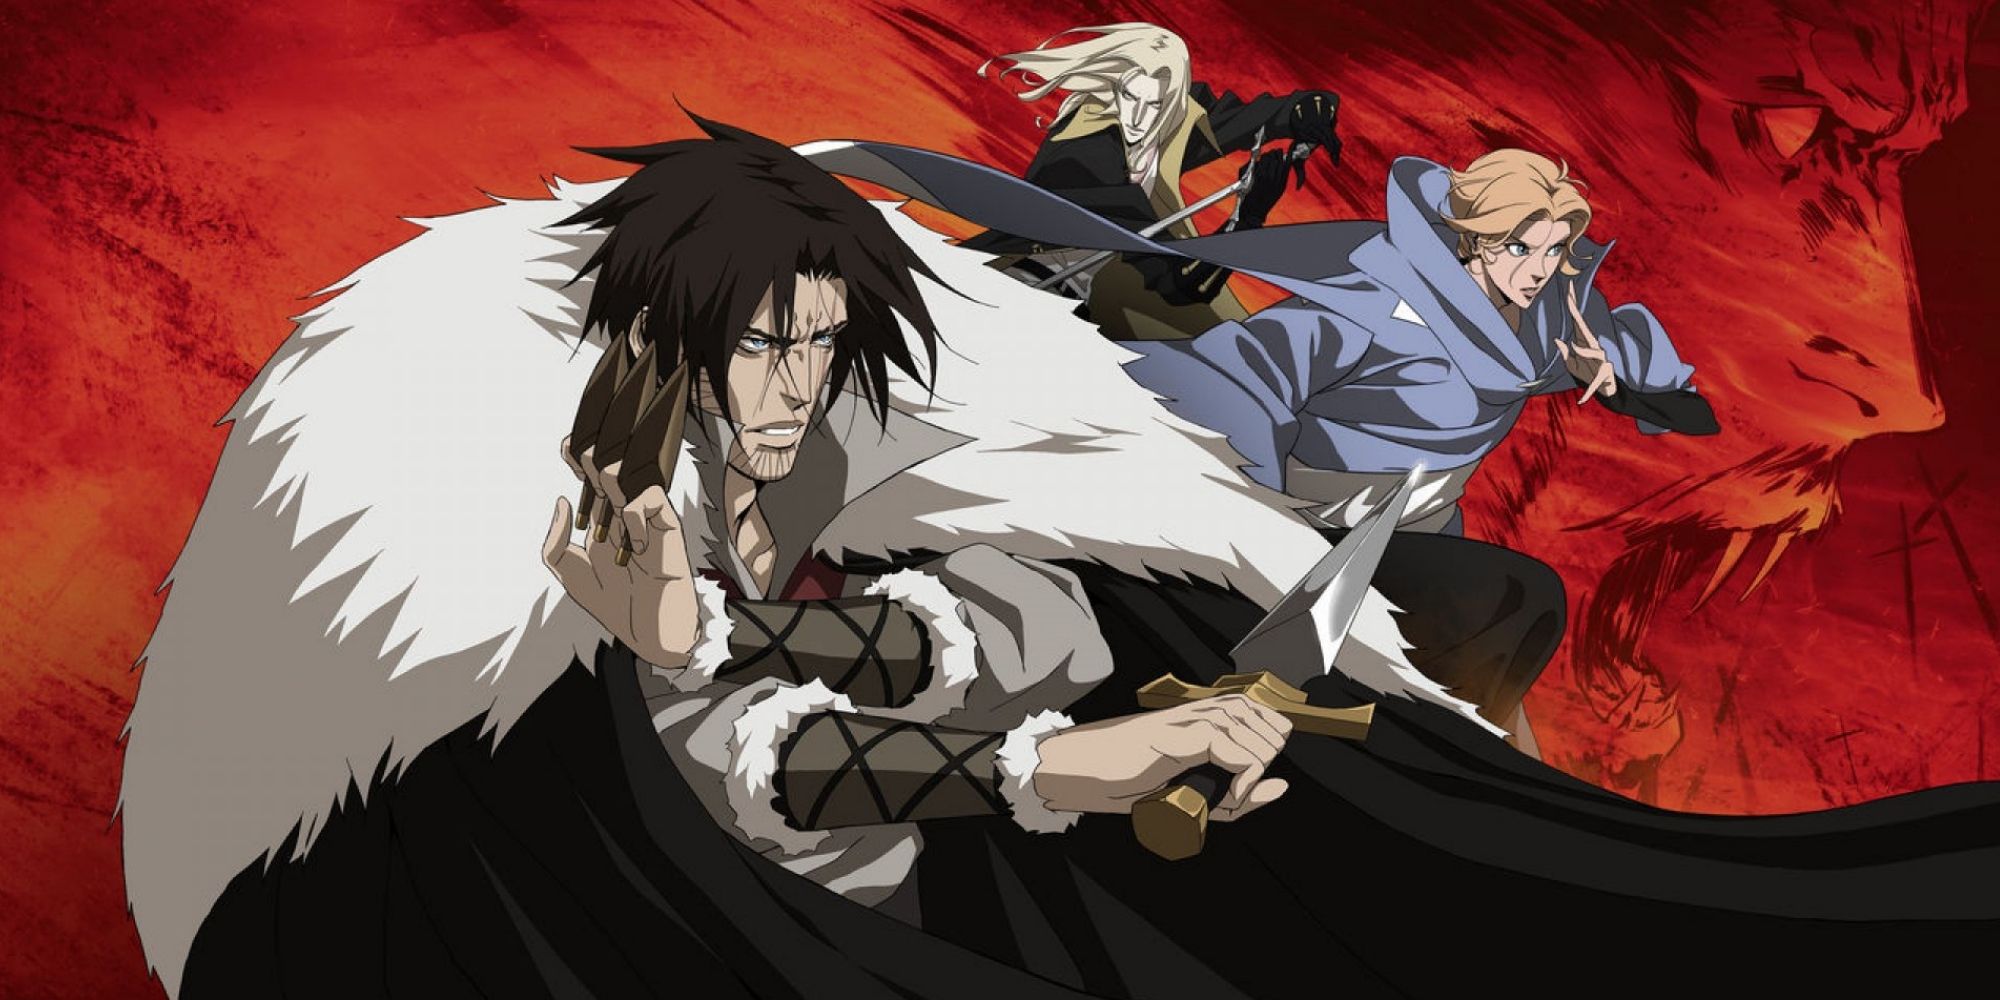 Promotional poster for 'Castlevania' showing Trevor Belmont, Sypha Belnades and the Alucard, ready for battle